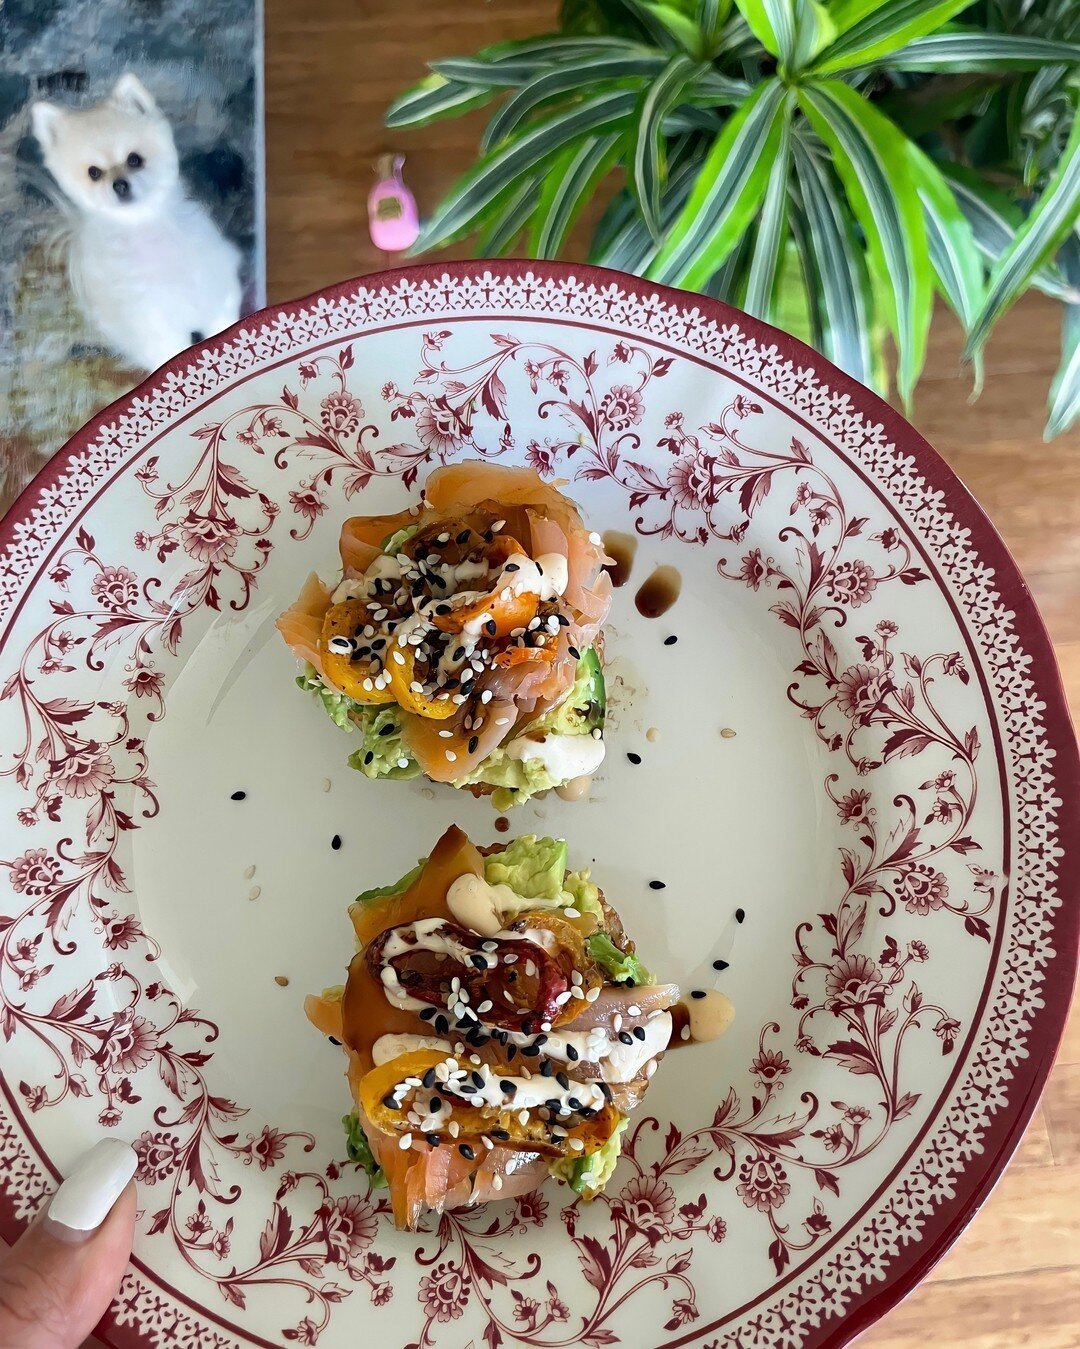 FEATURE WEEK! ​​​​​​​​
.​​​​​​​​
This week, we are taking images/recipes that have been sent to us that are just too good not to share. Todays feature comes from @iamiraa with the cutest dog EVER! 😍​​​​​​​​
.​​​​​​​​
.​​​​​​​​
Shop now @wholefoods @